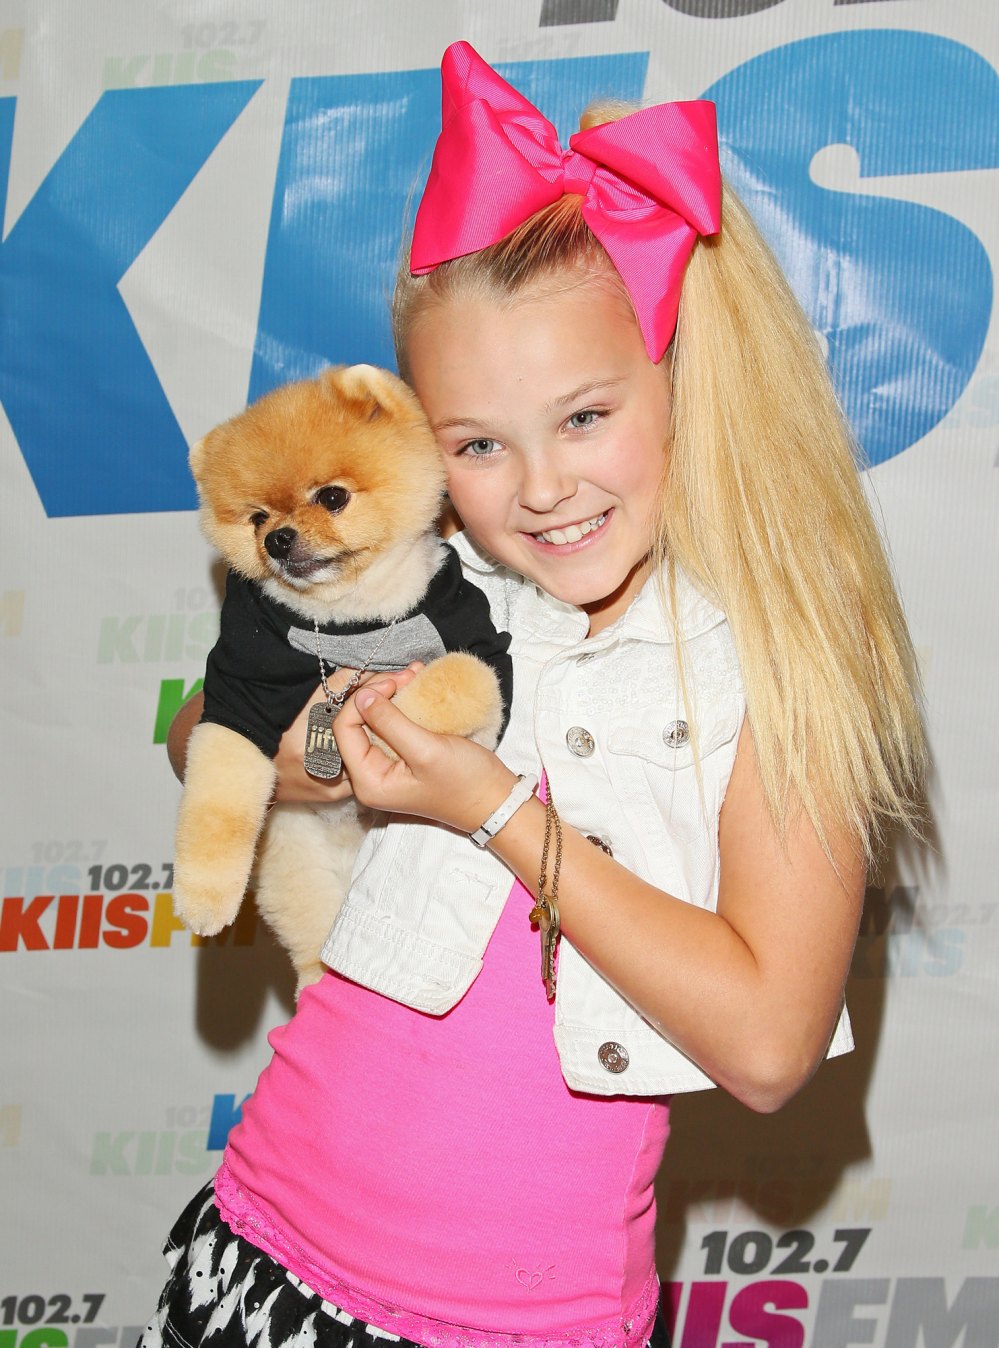 JoJo Siwa announces that the girl with the bow will 